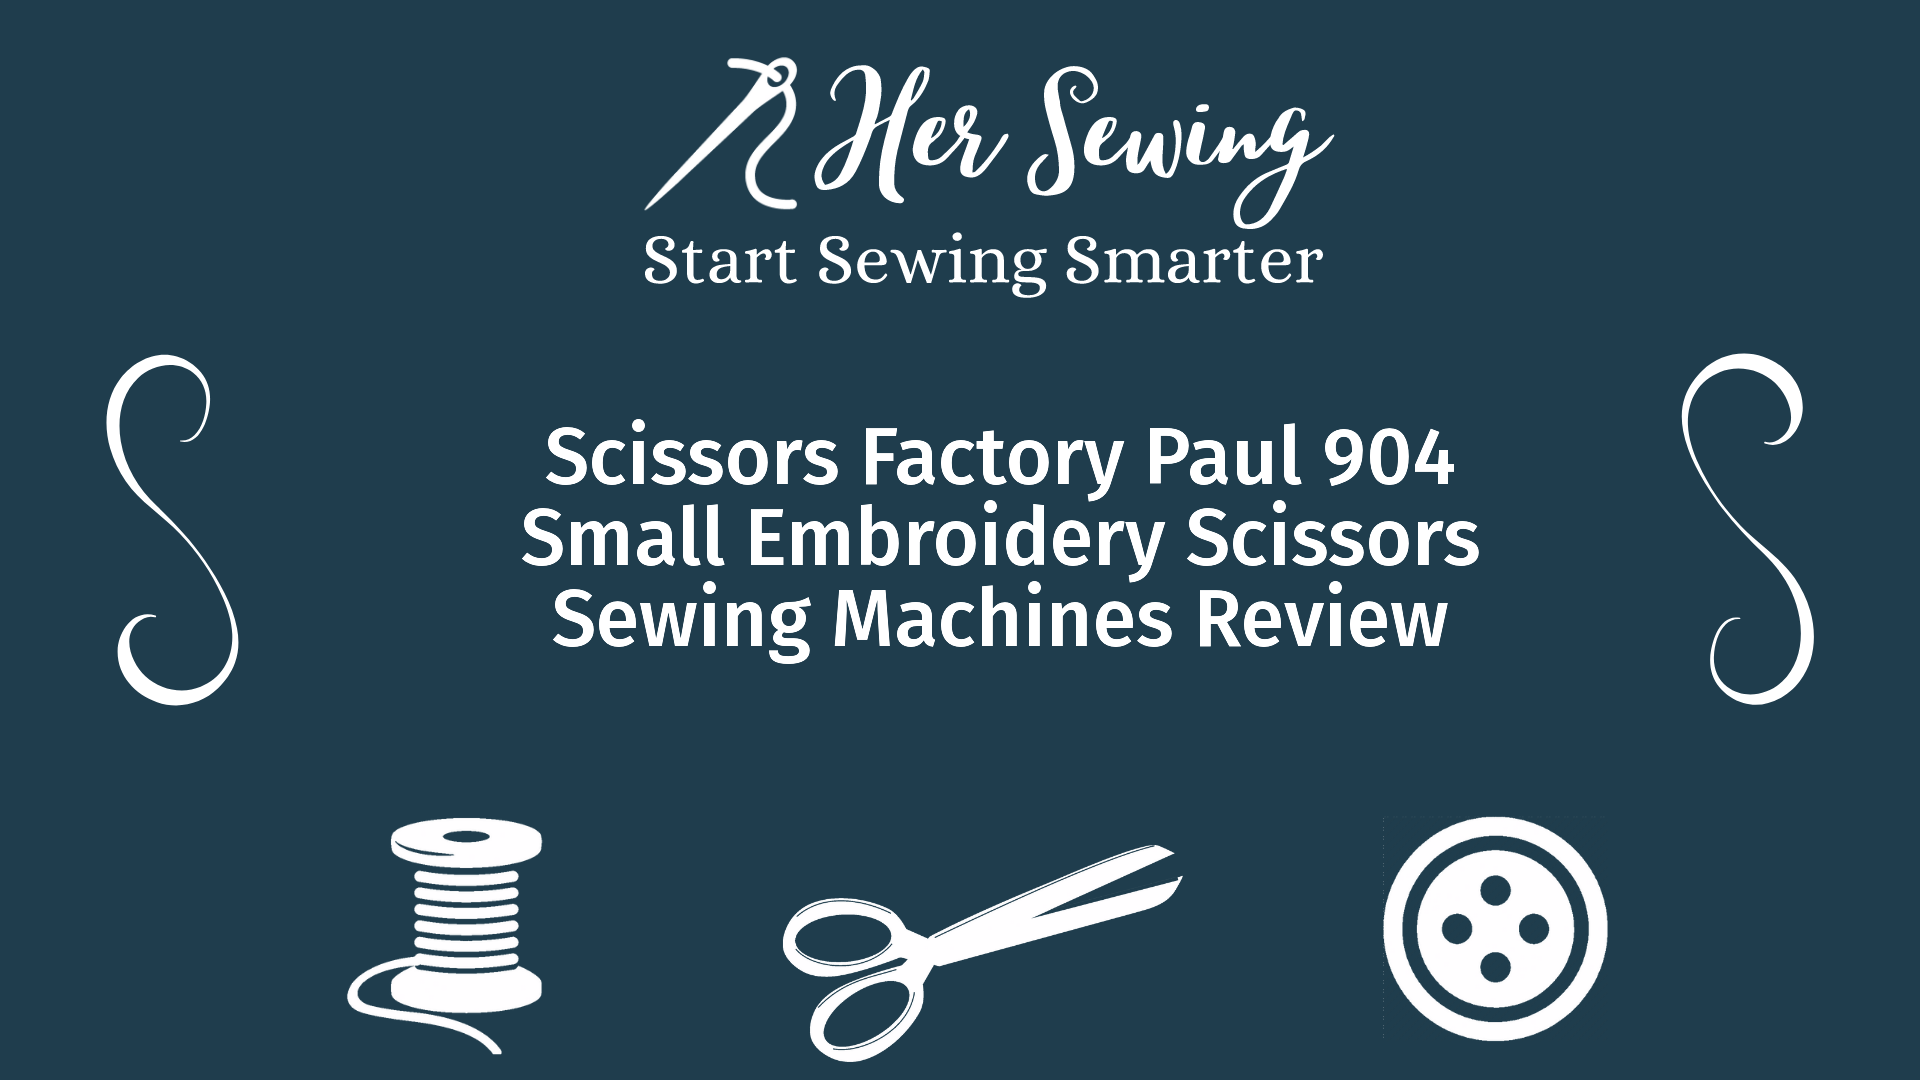 Scissors Factory Paul 904 Small Embroidery Scissors Sewing Machines Review